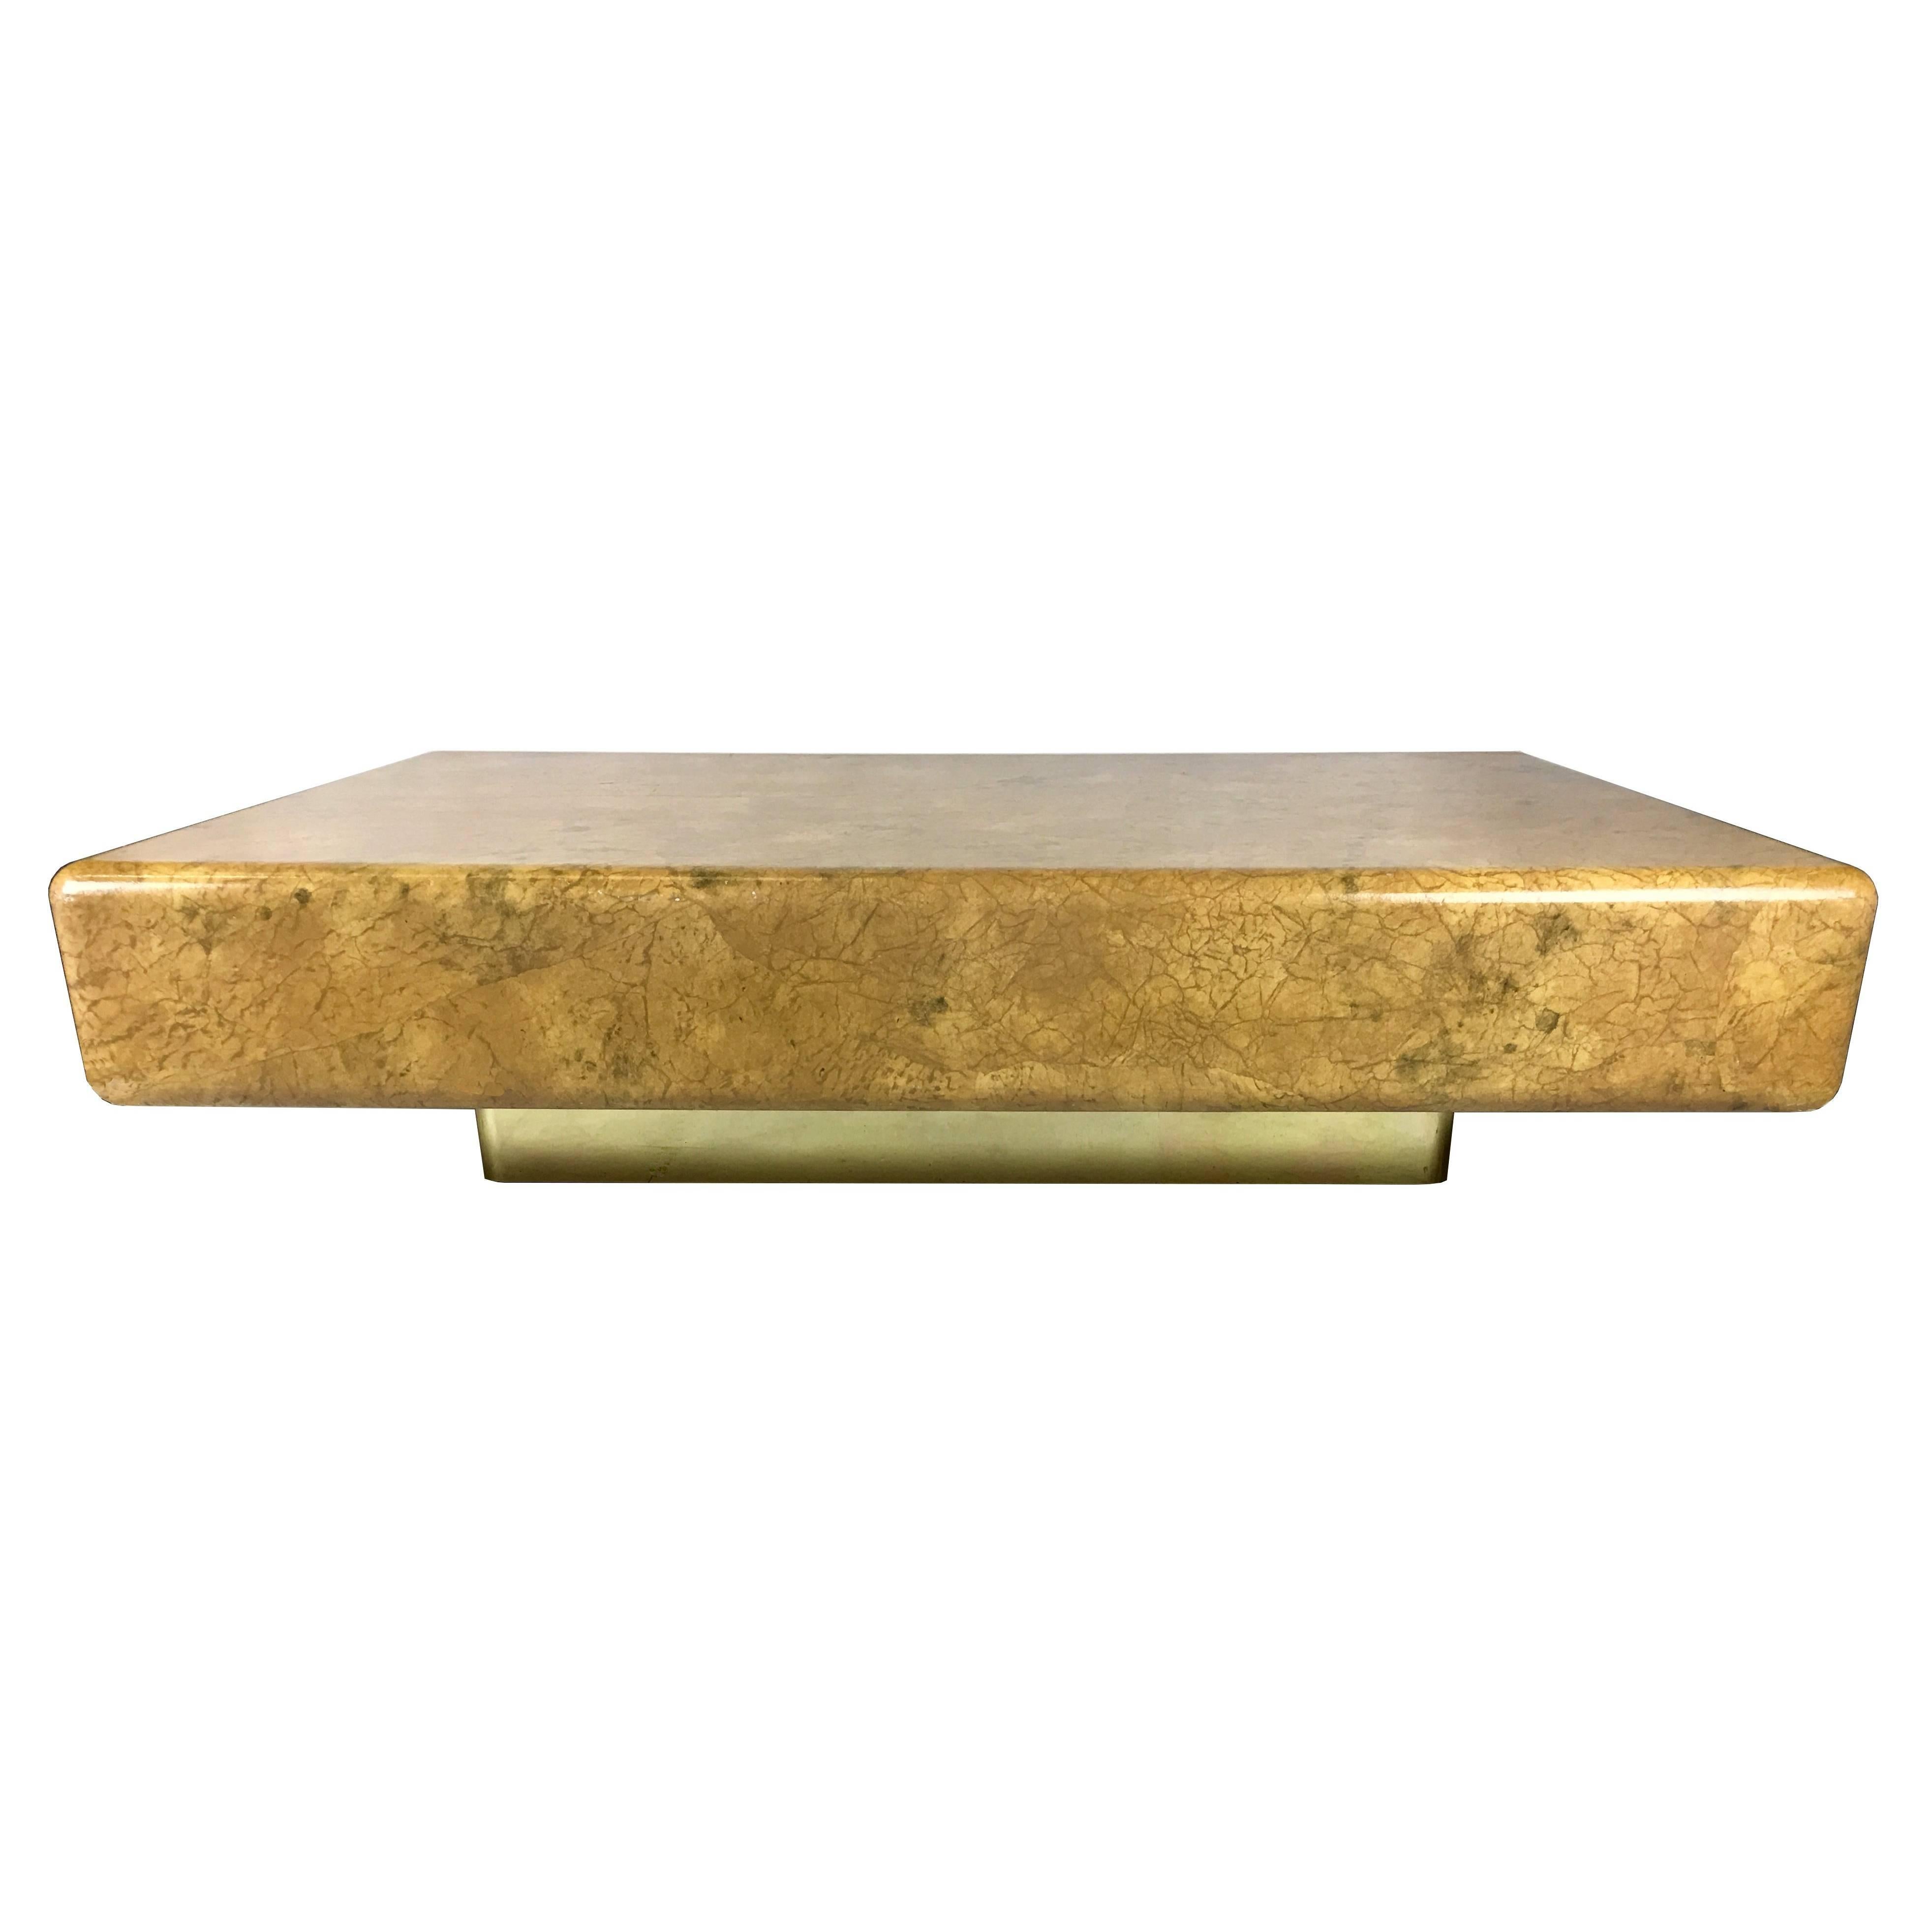 Large scale lacquered parchment coffee table raised on a brass clad recessed base in the style of Karl Springer's 80s designs. Top quality materials and workmanship.